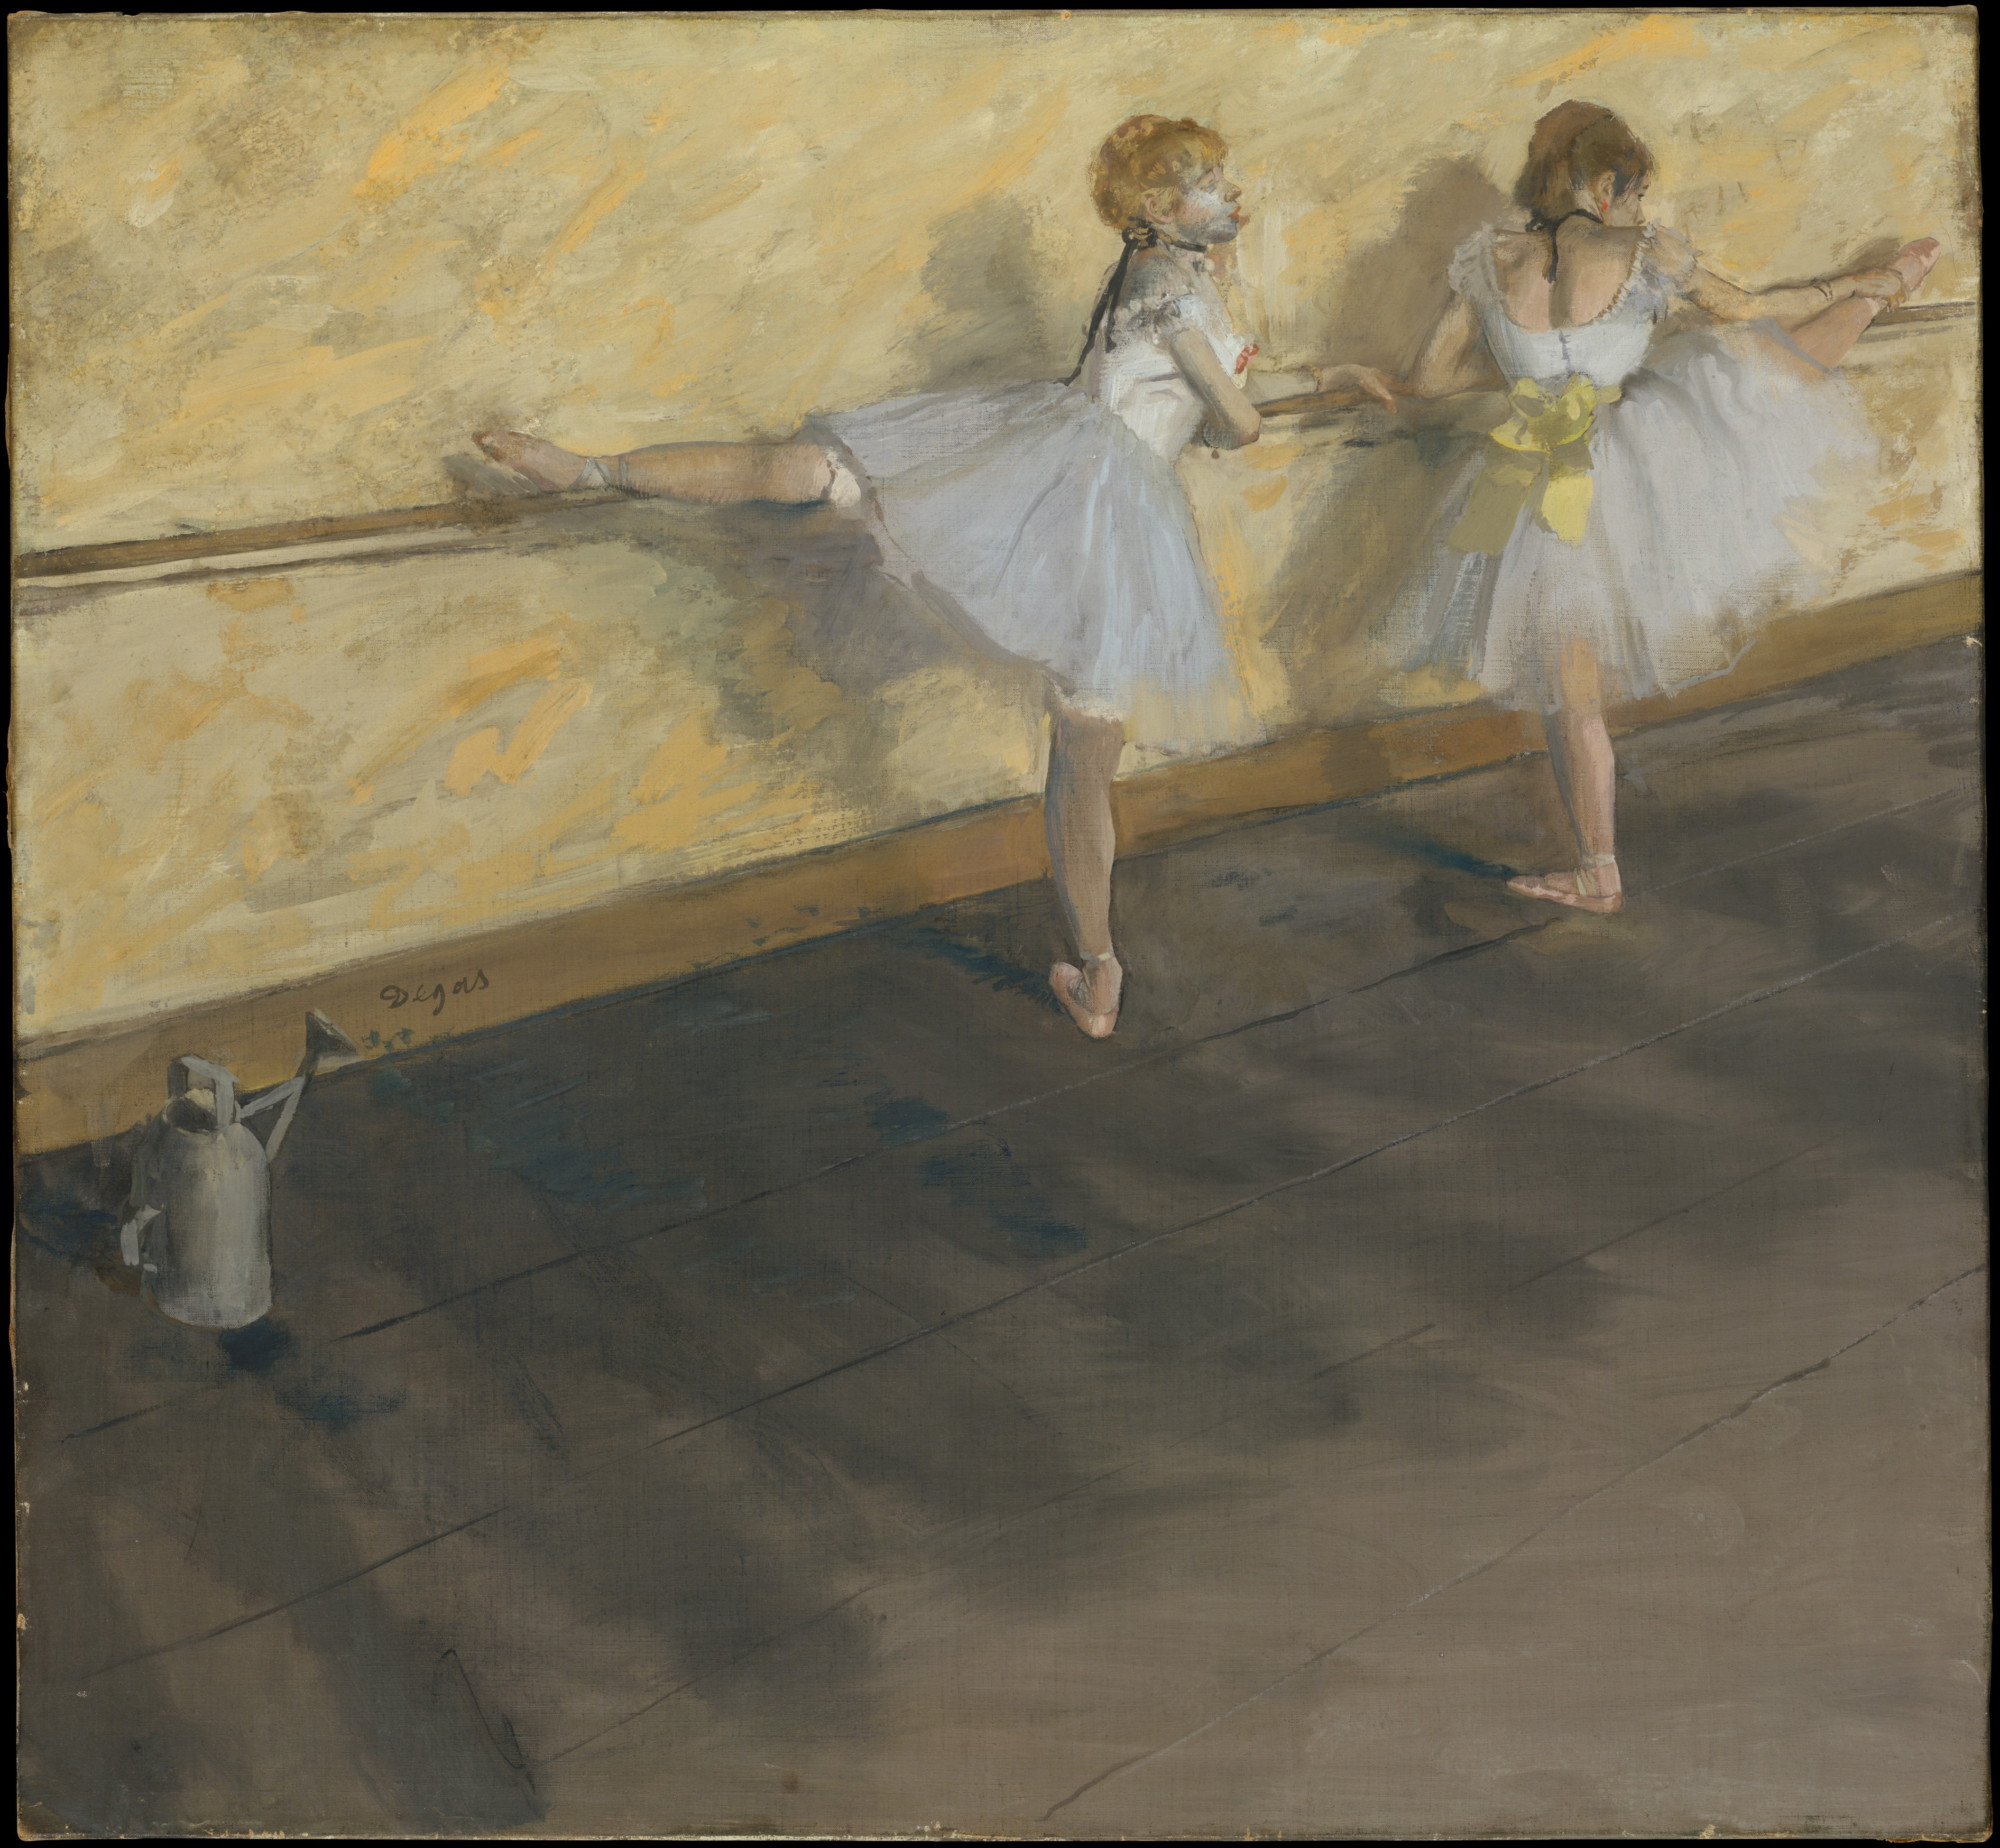 Albums 104+ Images what role did photography play for the artist edgar degas Completed